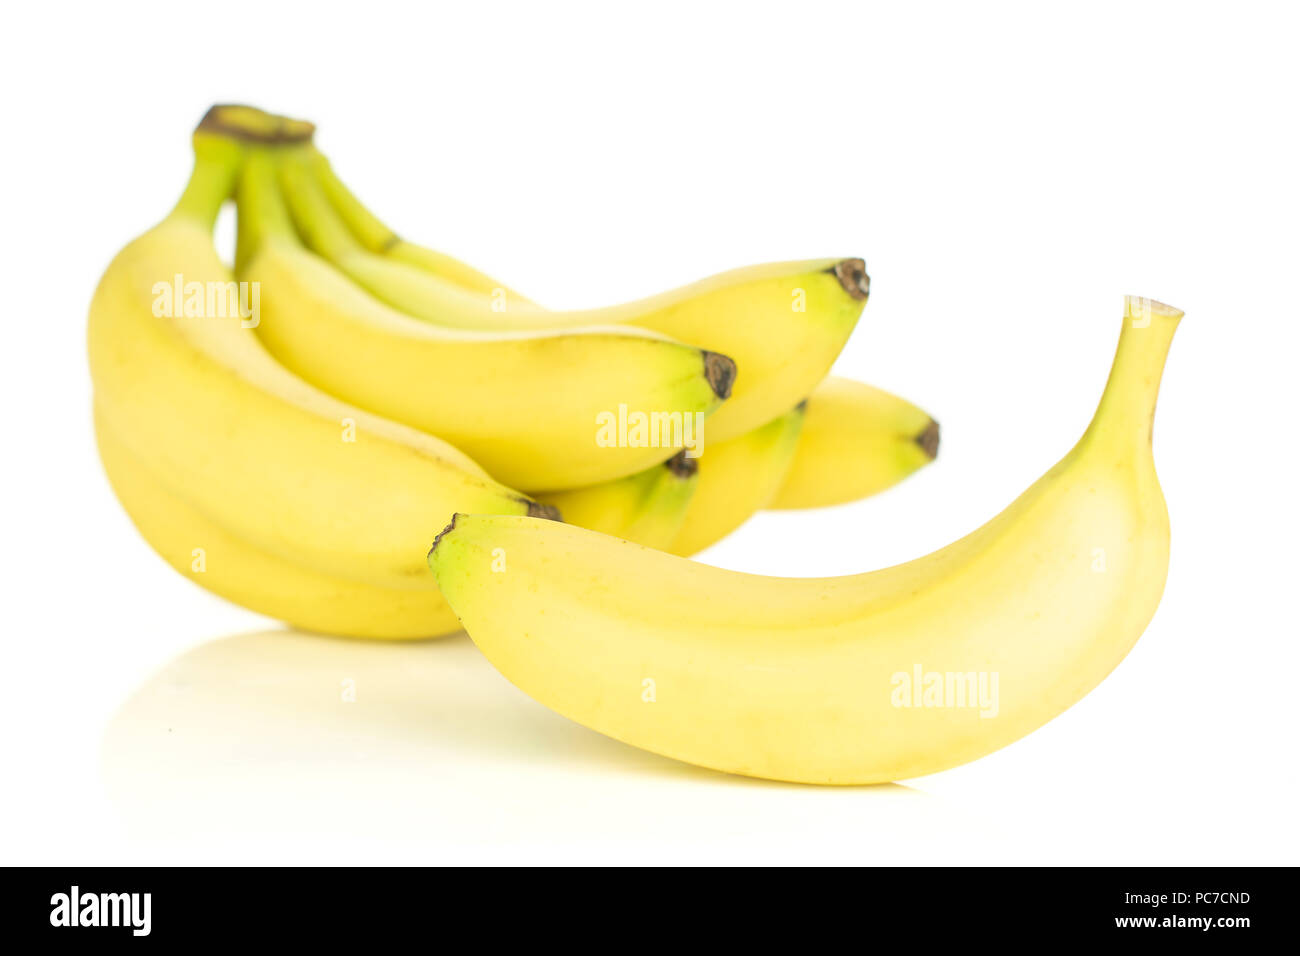 Lot of whole fresh yellow banana one cluster and separated banana isolated on white background Stock Photo